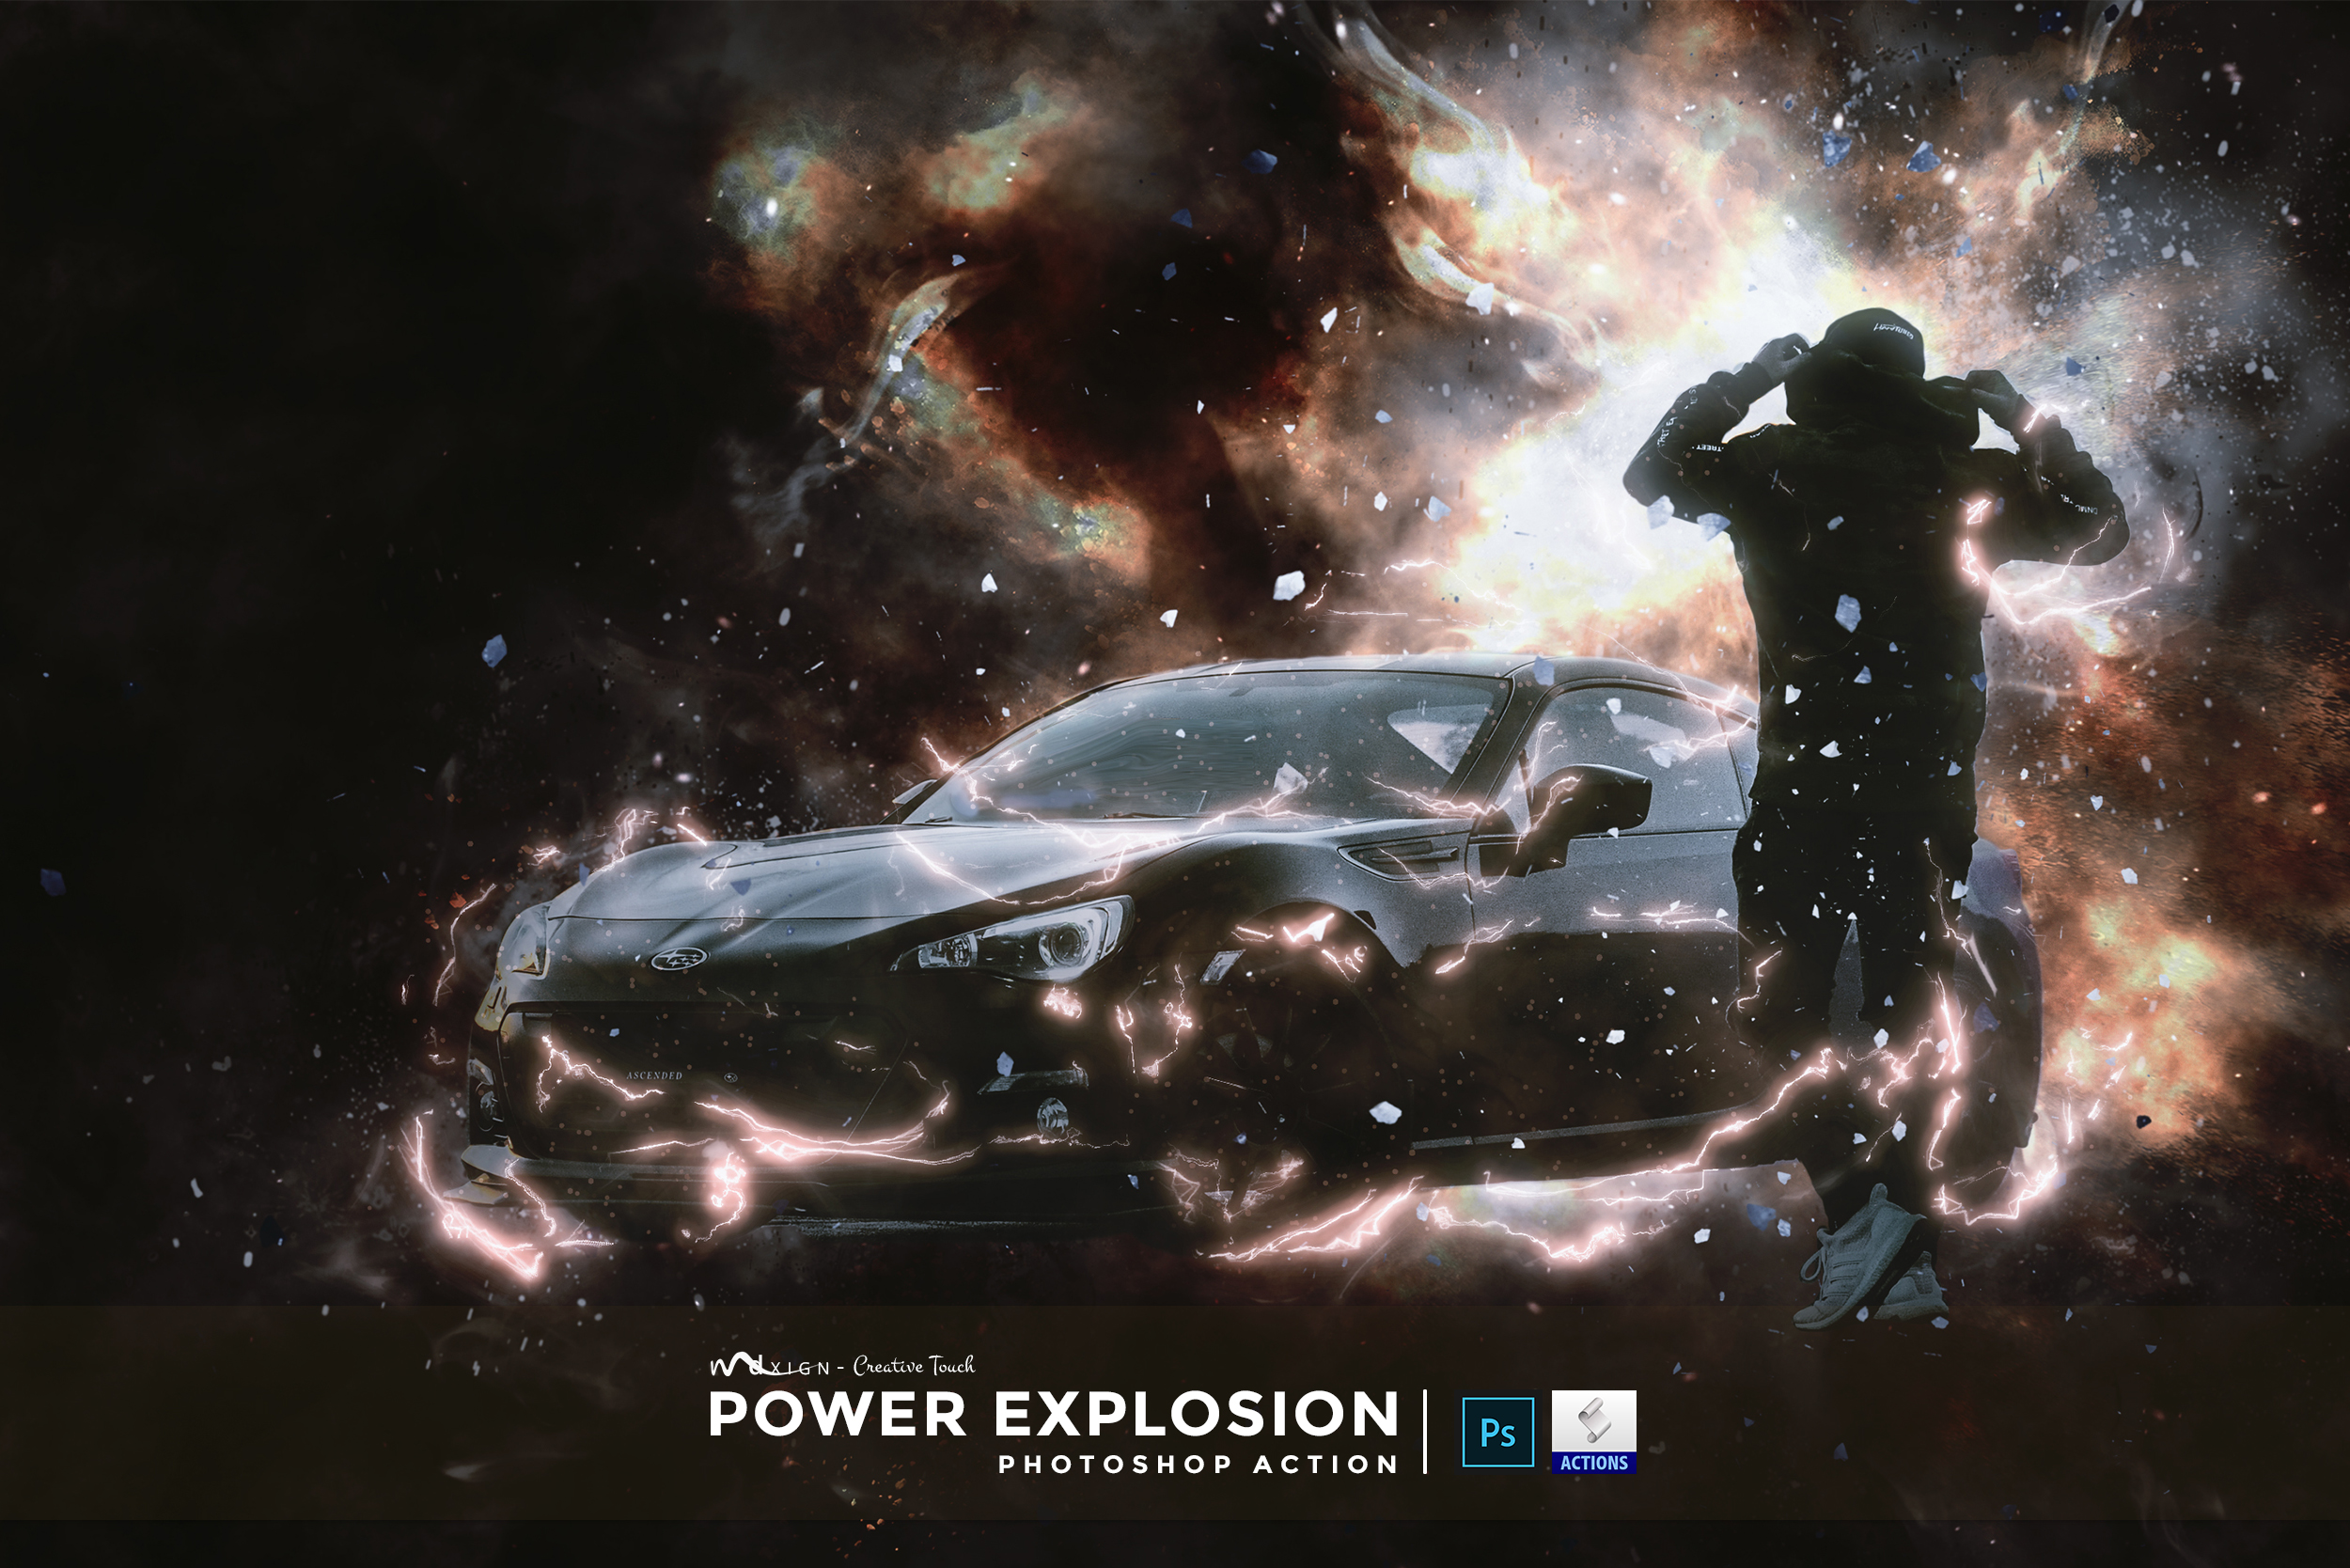 Power Explosion Photoshop Action